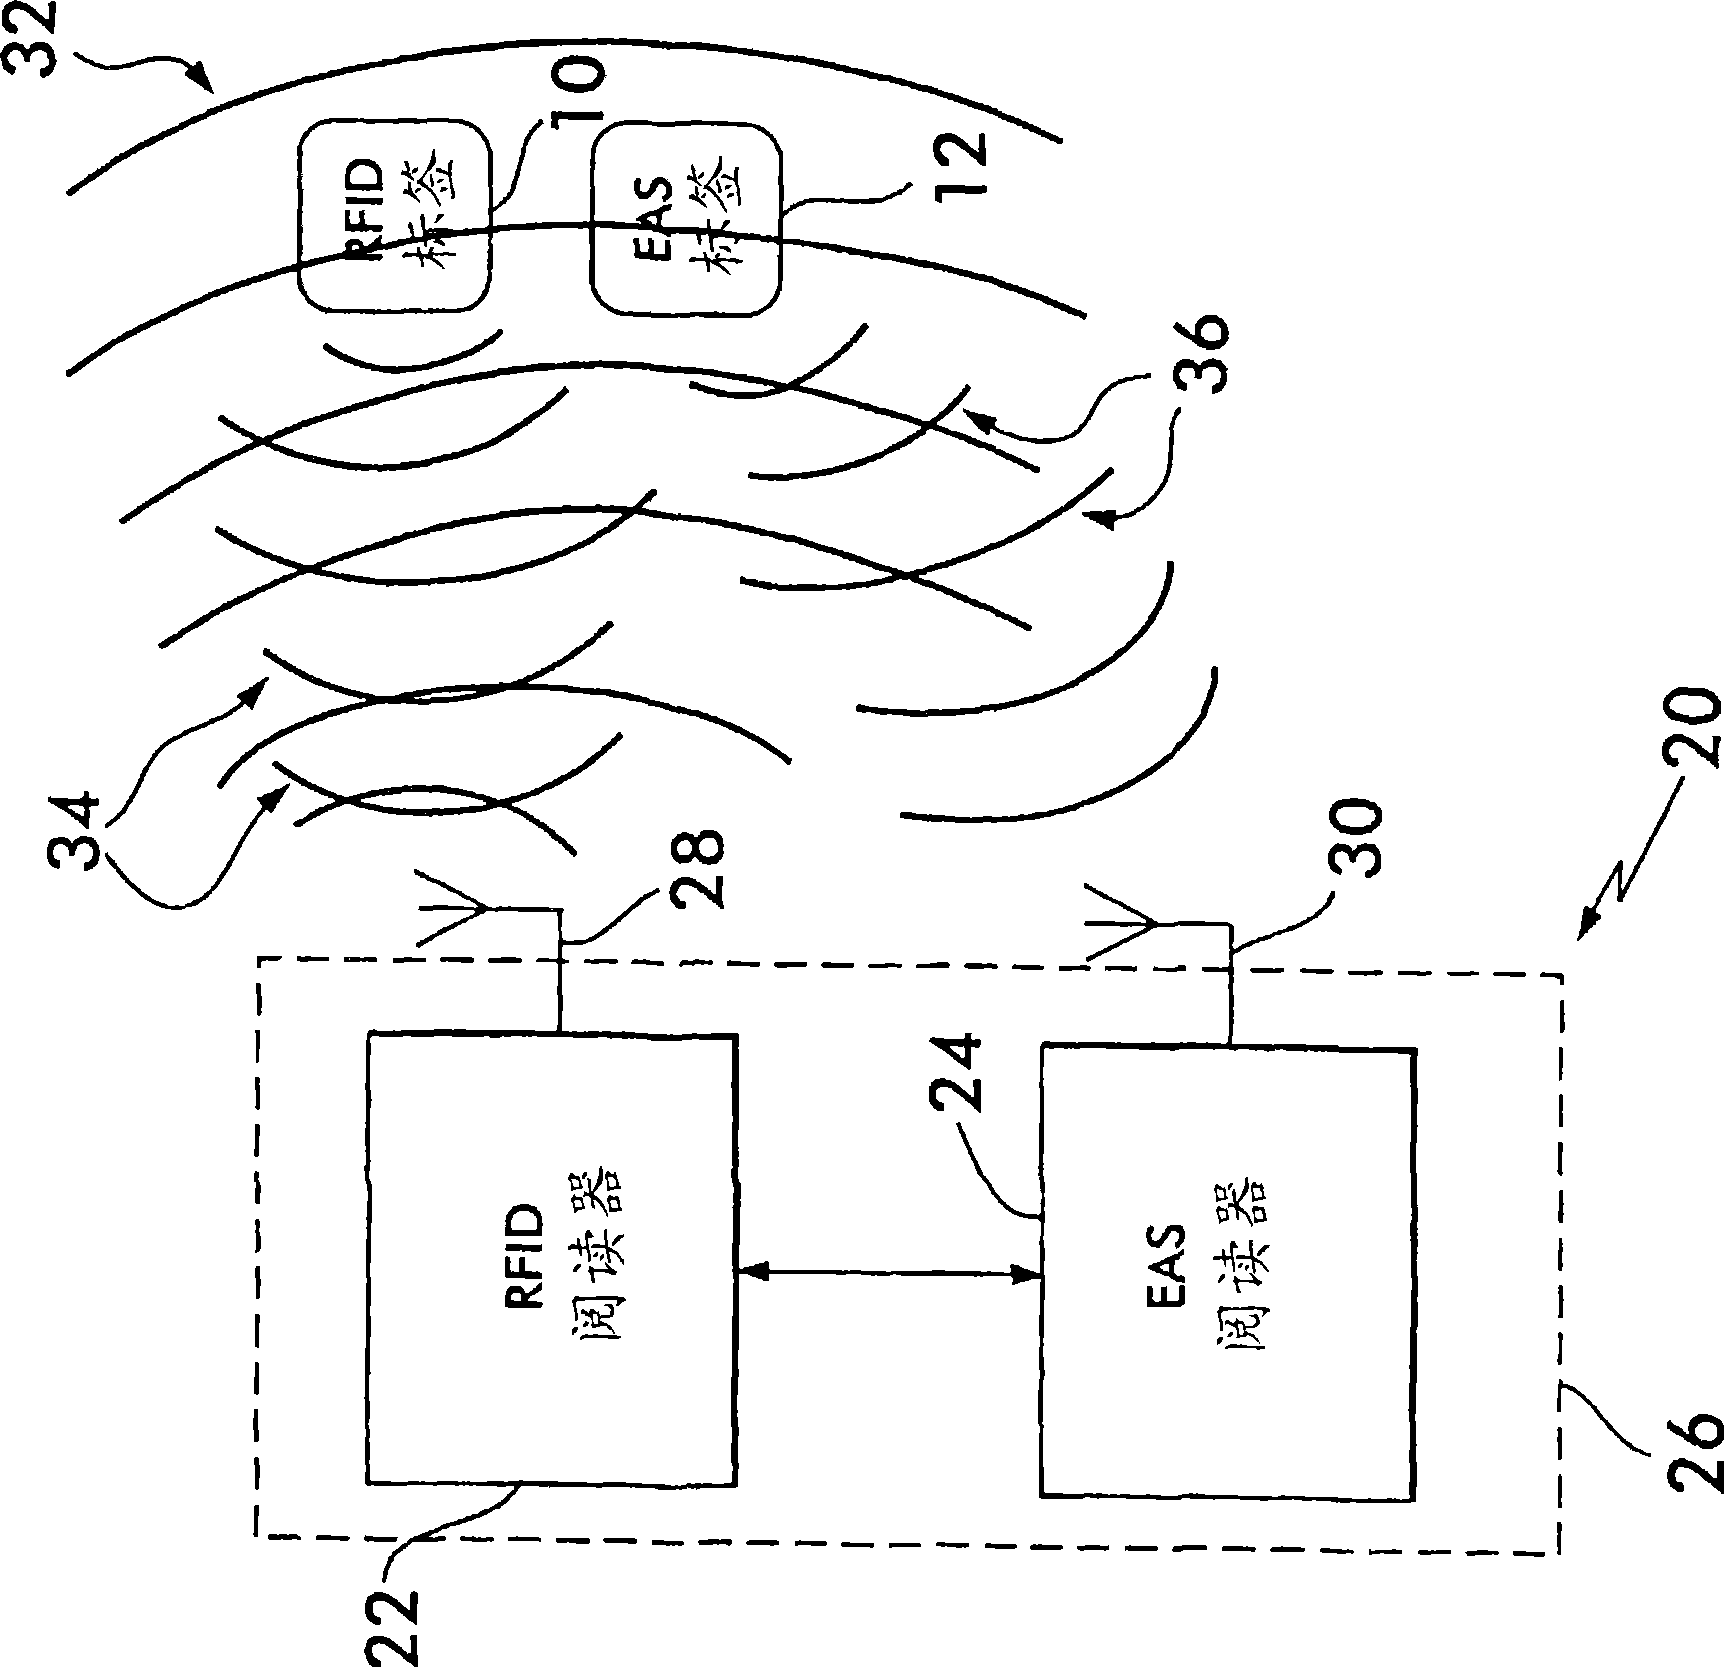 System and method for detecting EAS/RFID tags using step listen